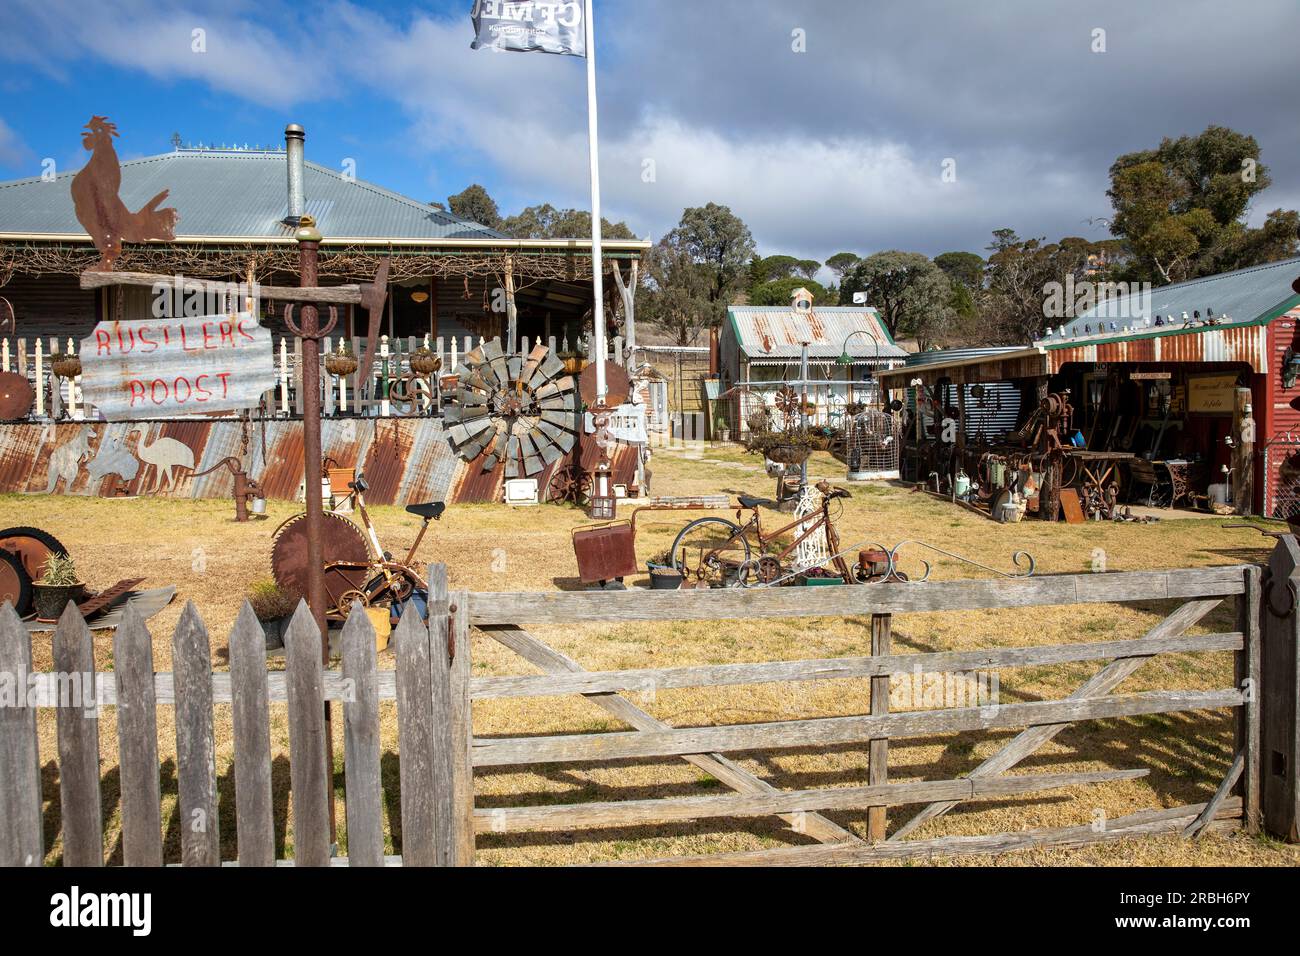 July 2023, Sofala former gold mining town and village house Rustlers Roost with rusty metalwork art and collectables, New South Wales,Australia Stock Photo